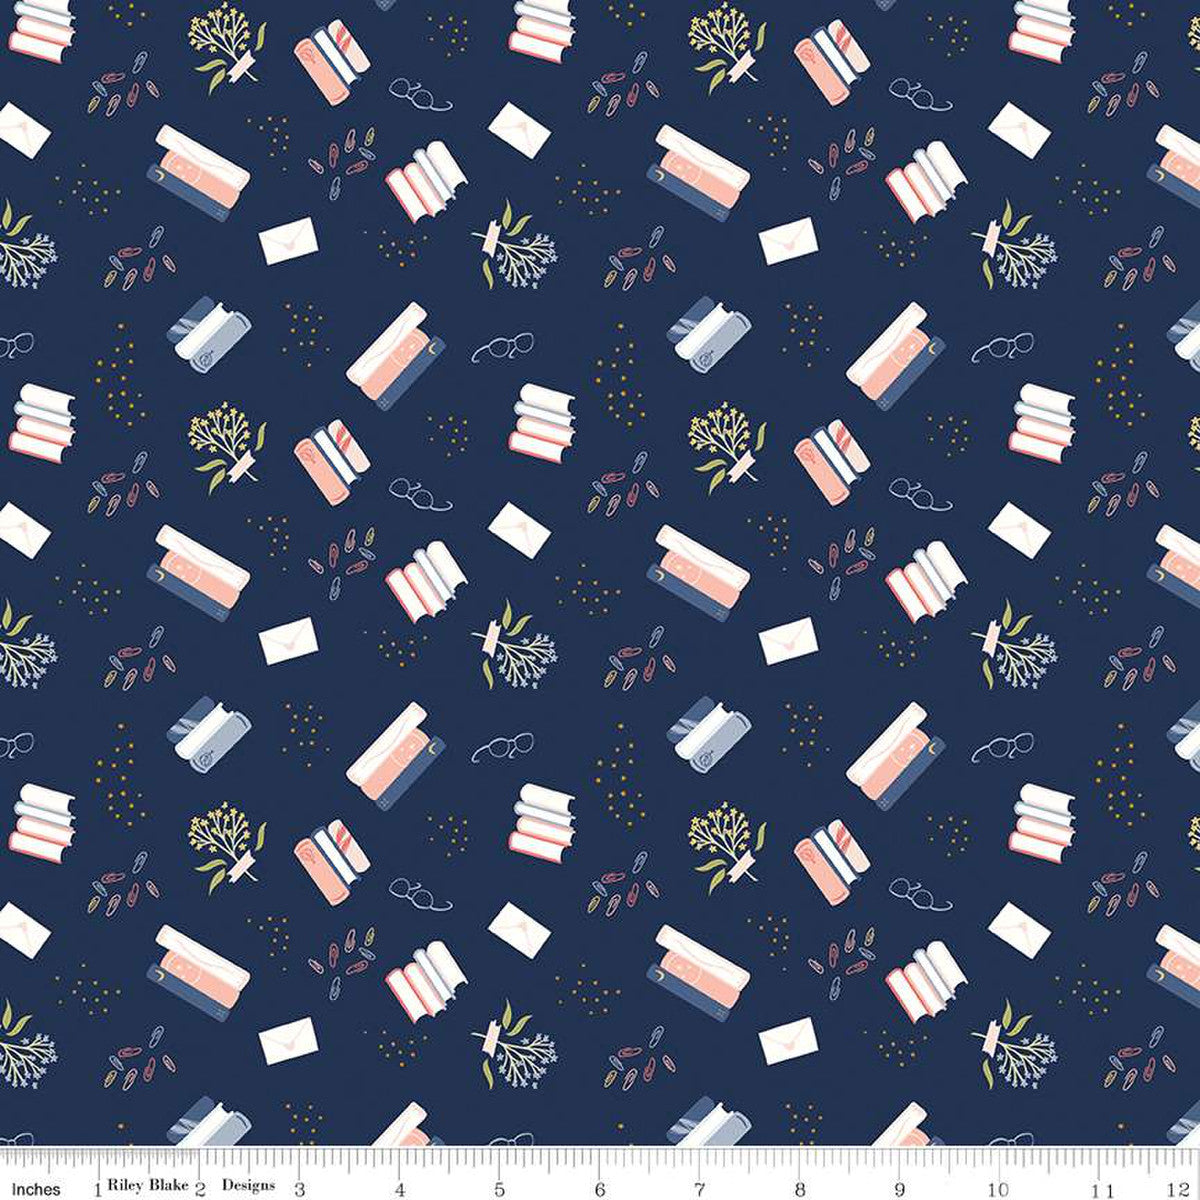 Between The Pages Bookish Navy Yardage by Fran Gulick | Riley Blake Designs #C15371-NAVY